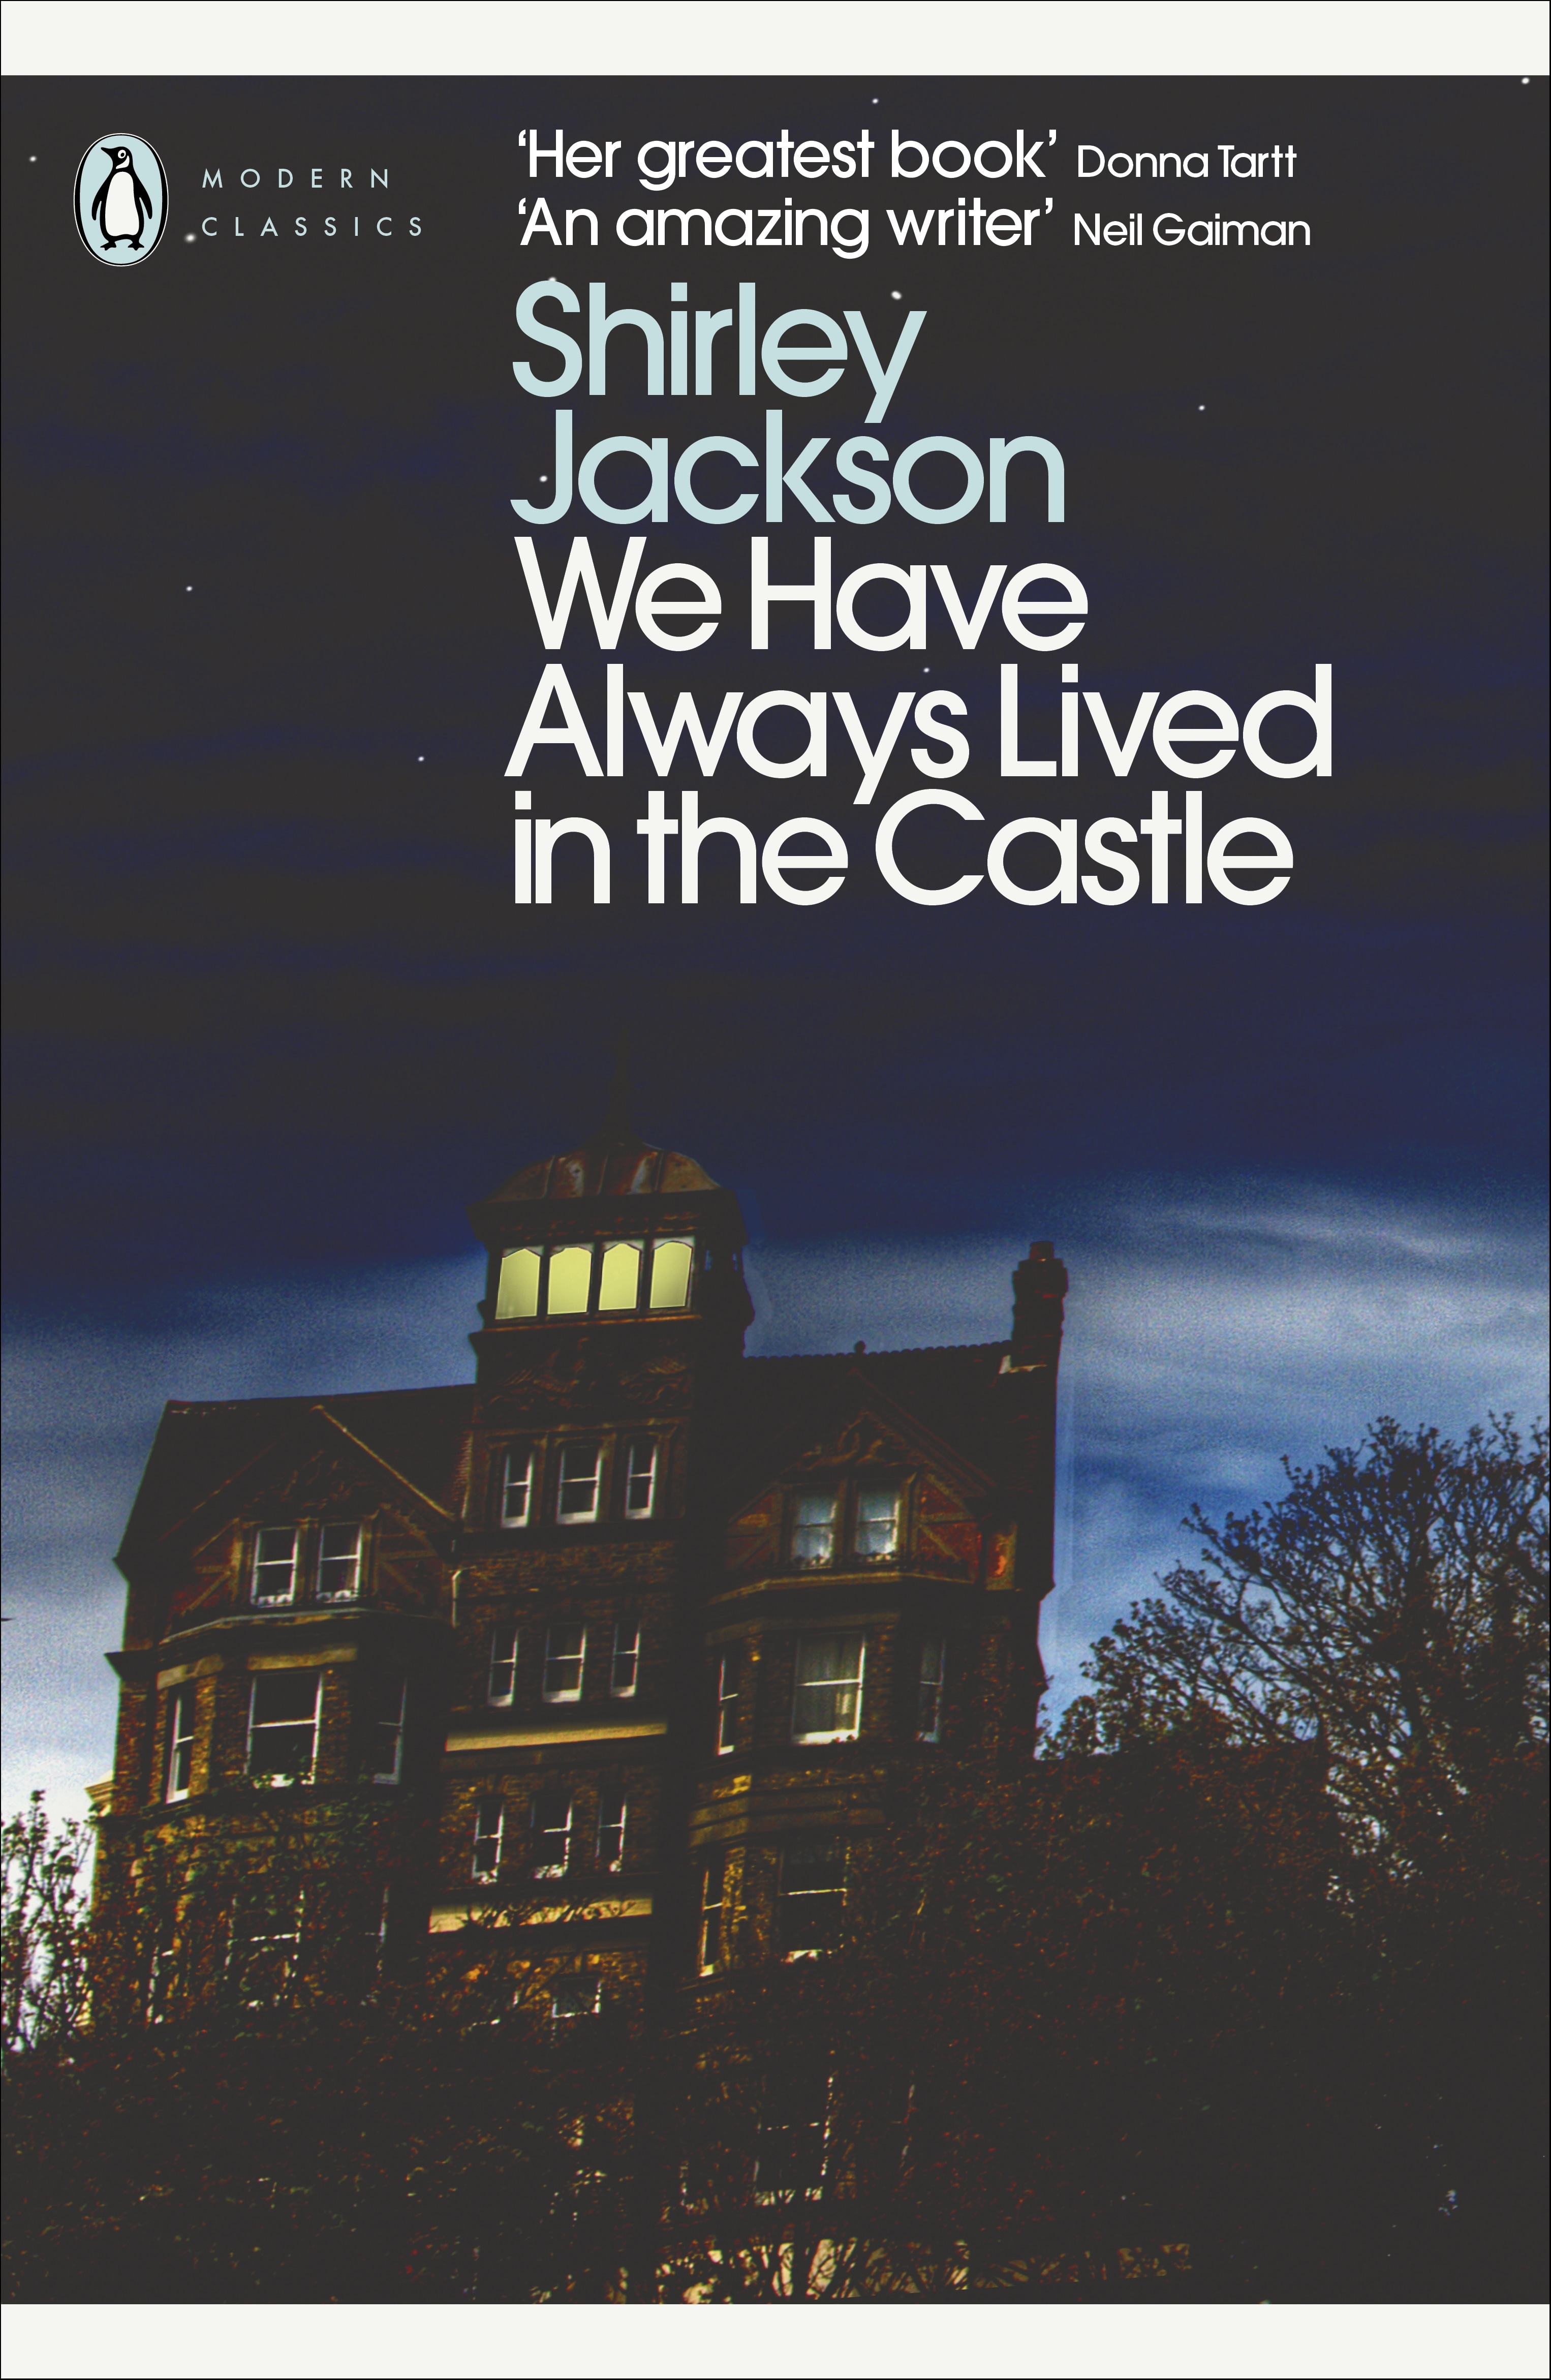 Book “We Have Always Lived in the Castle” by Shirley Jackson — October 1, 2009